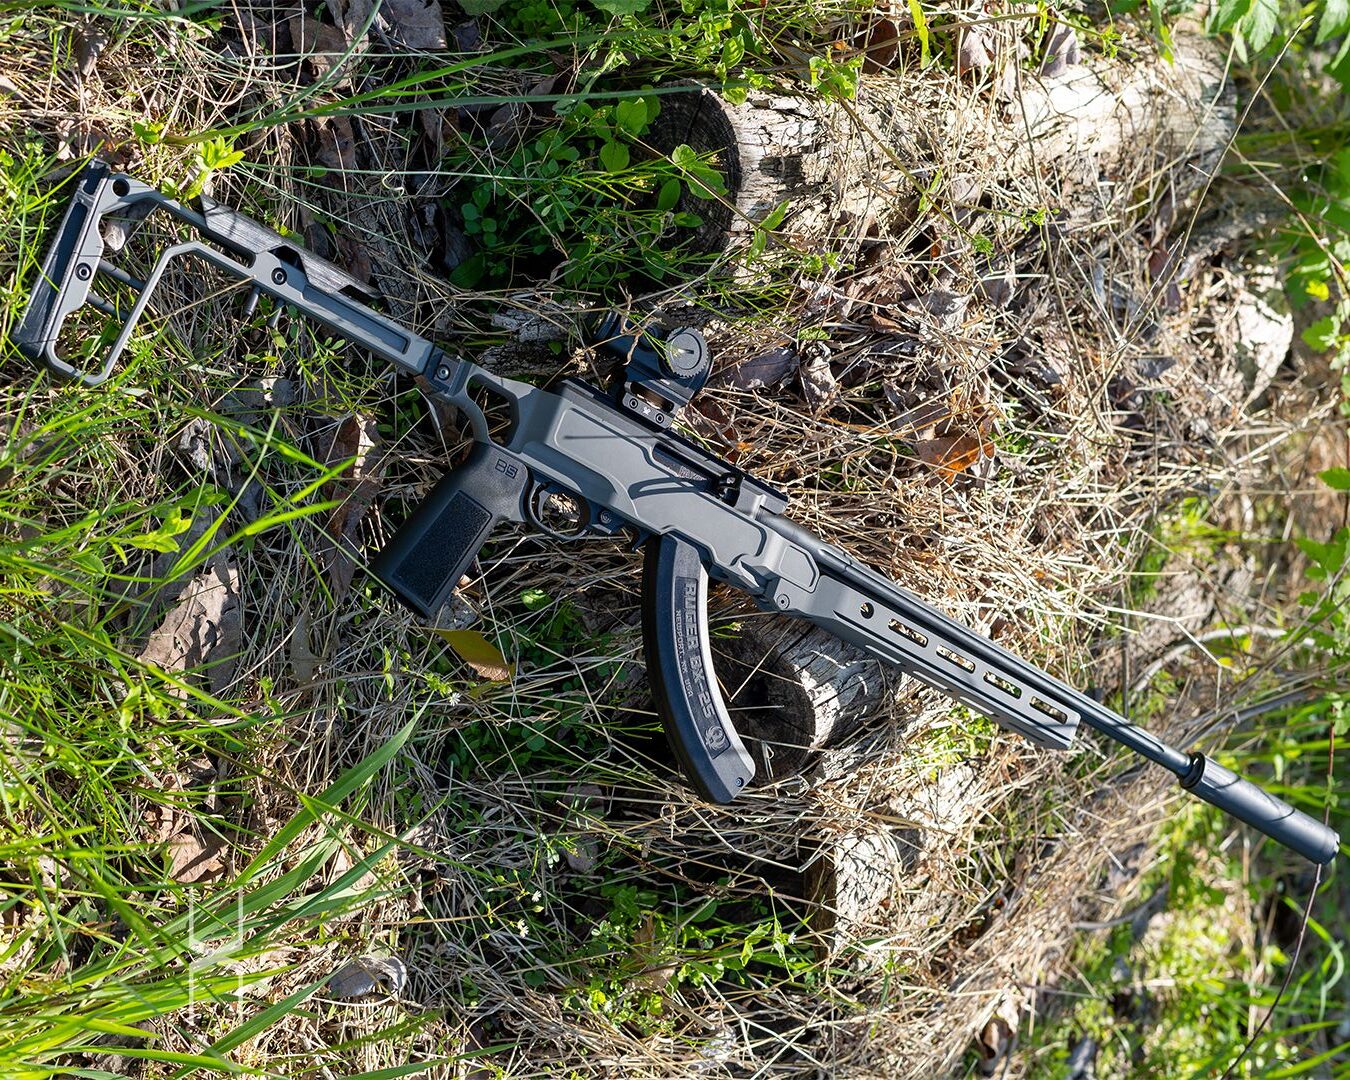 From Plinking to Competition: Faxon FX22 Complete Firearms